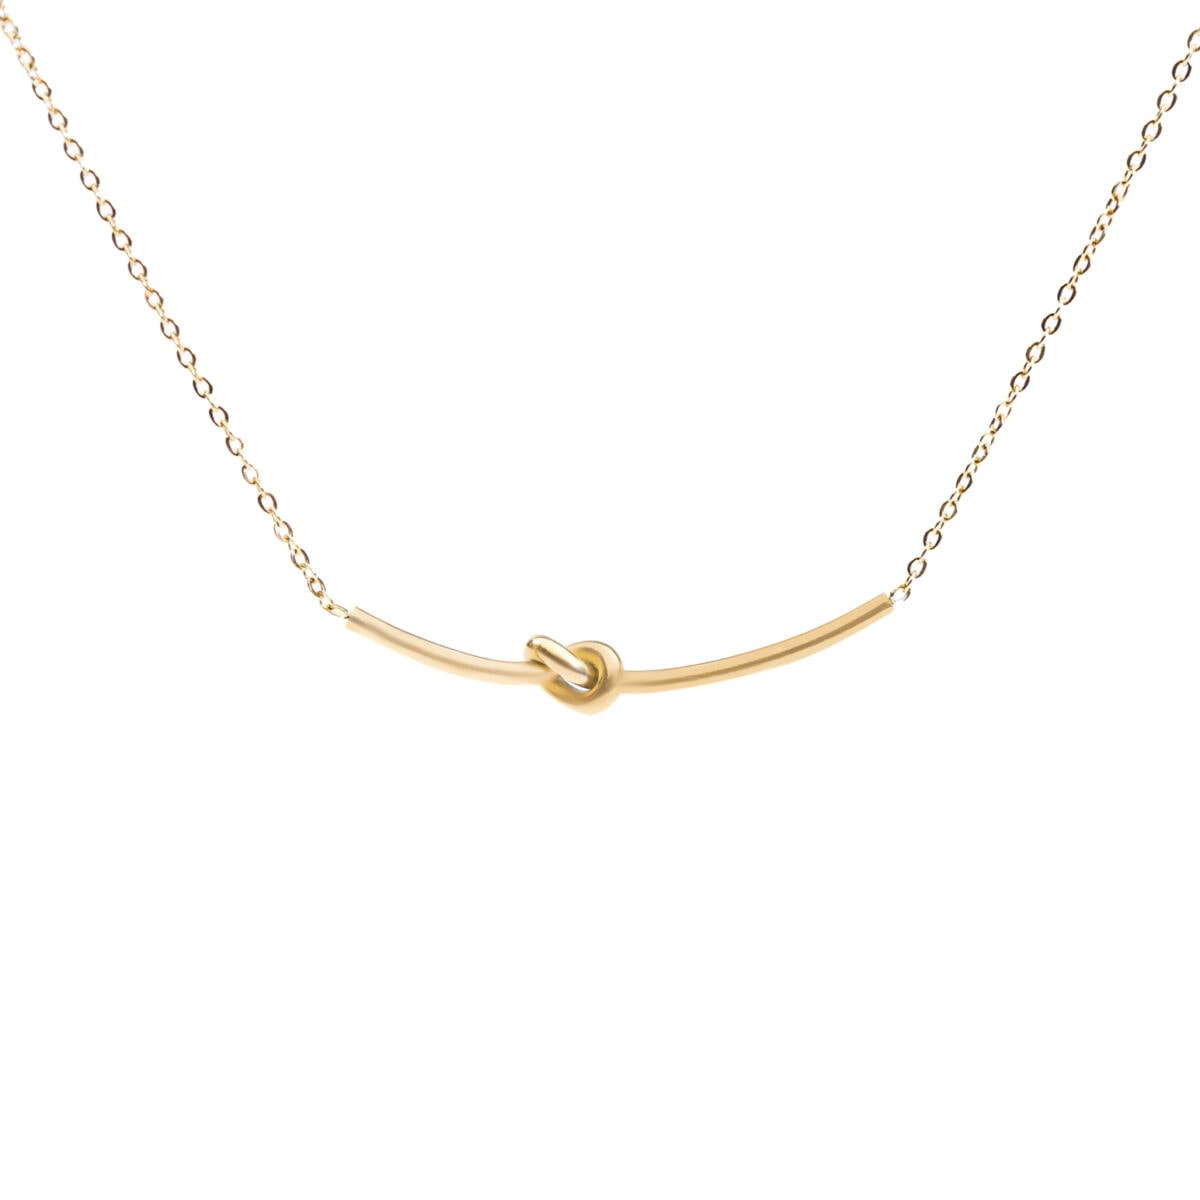 https://m.clubbella.co/product/smiley-knot-gold-necklace/ Smiley Knot Gold Necklace (1)